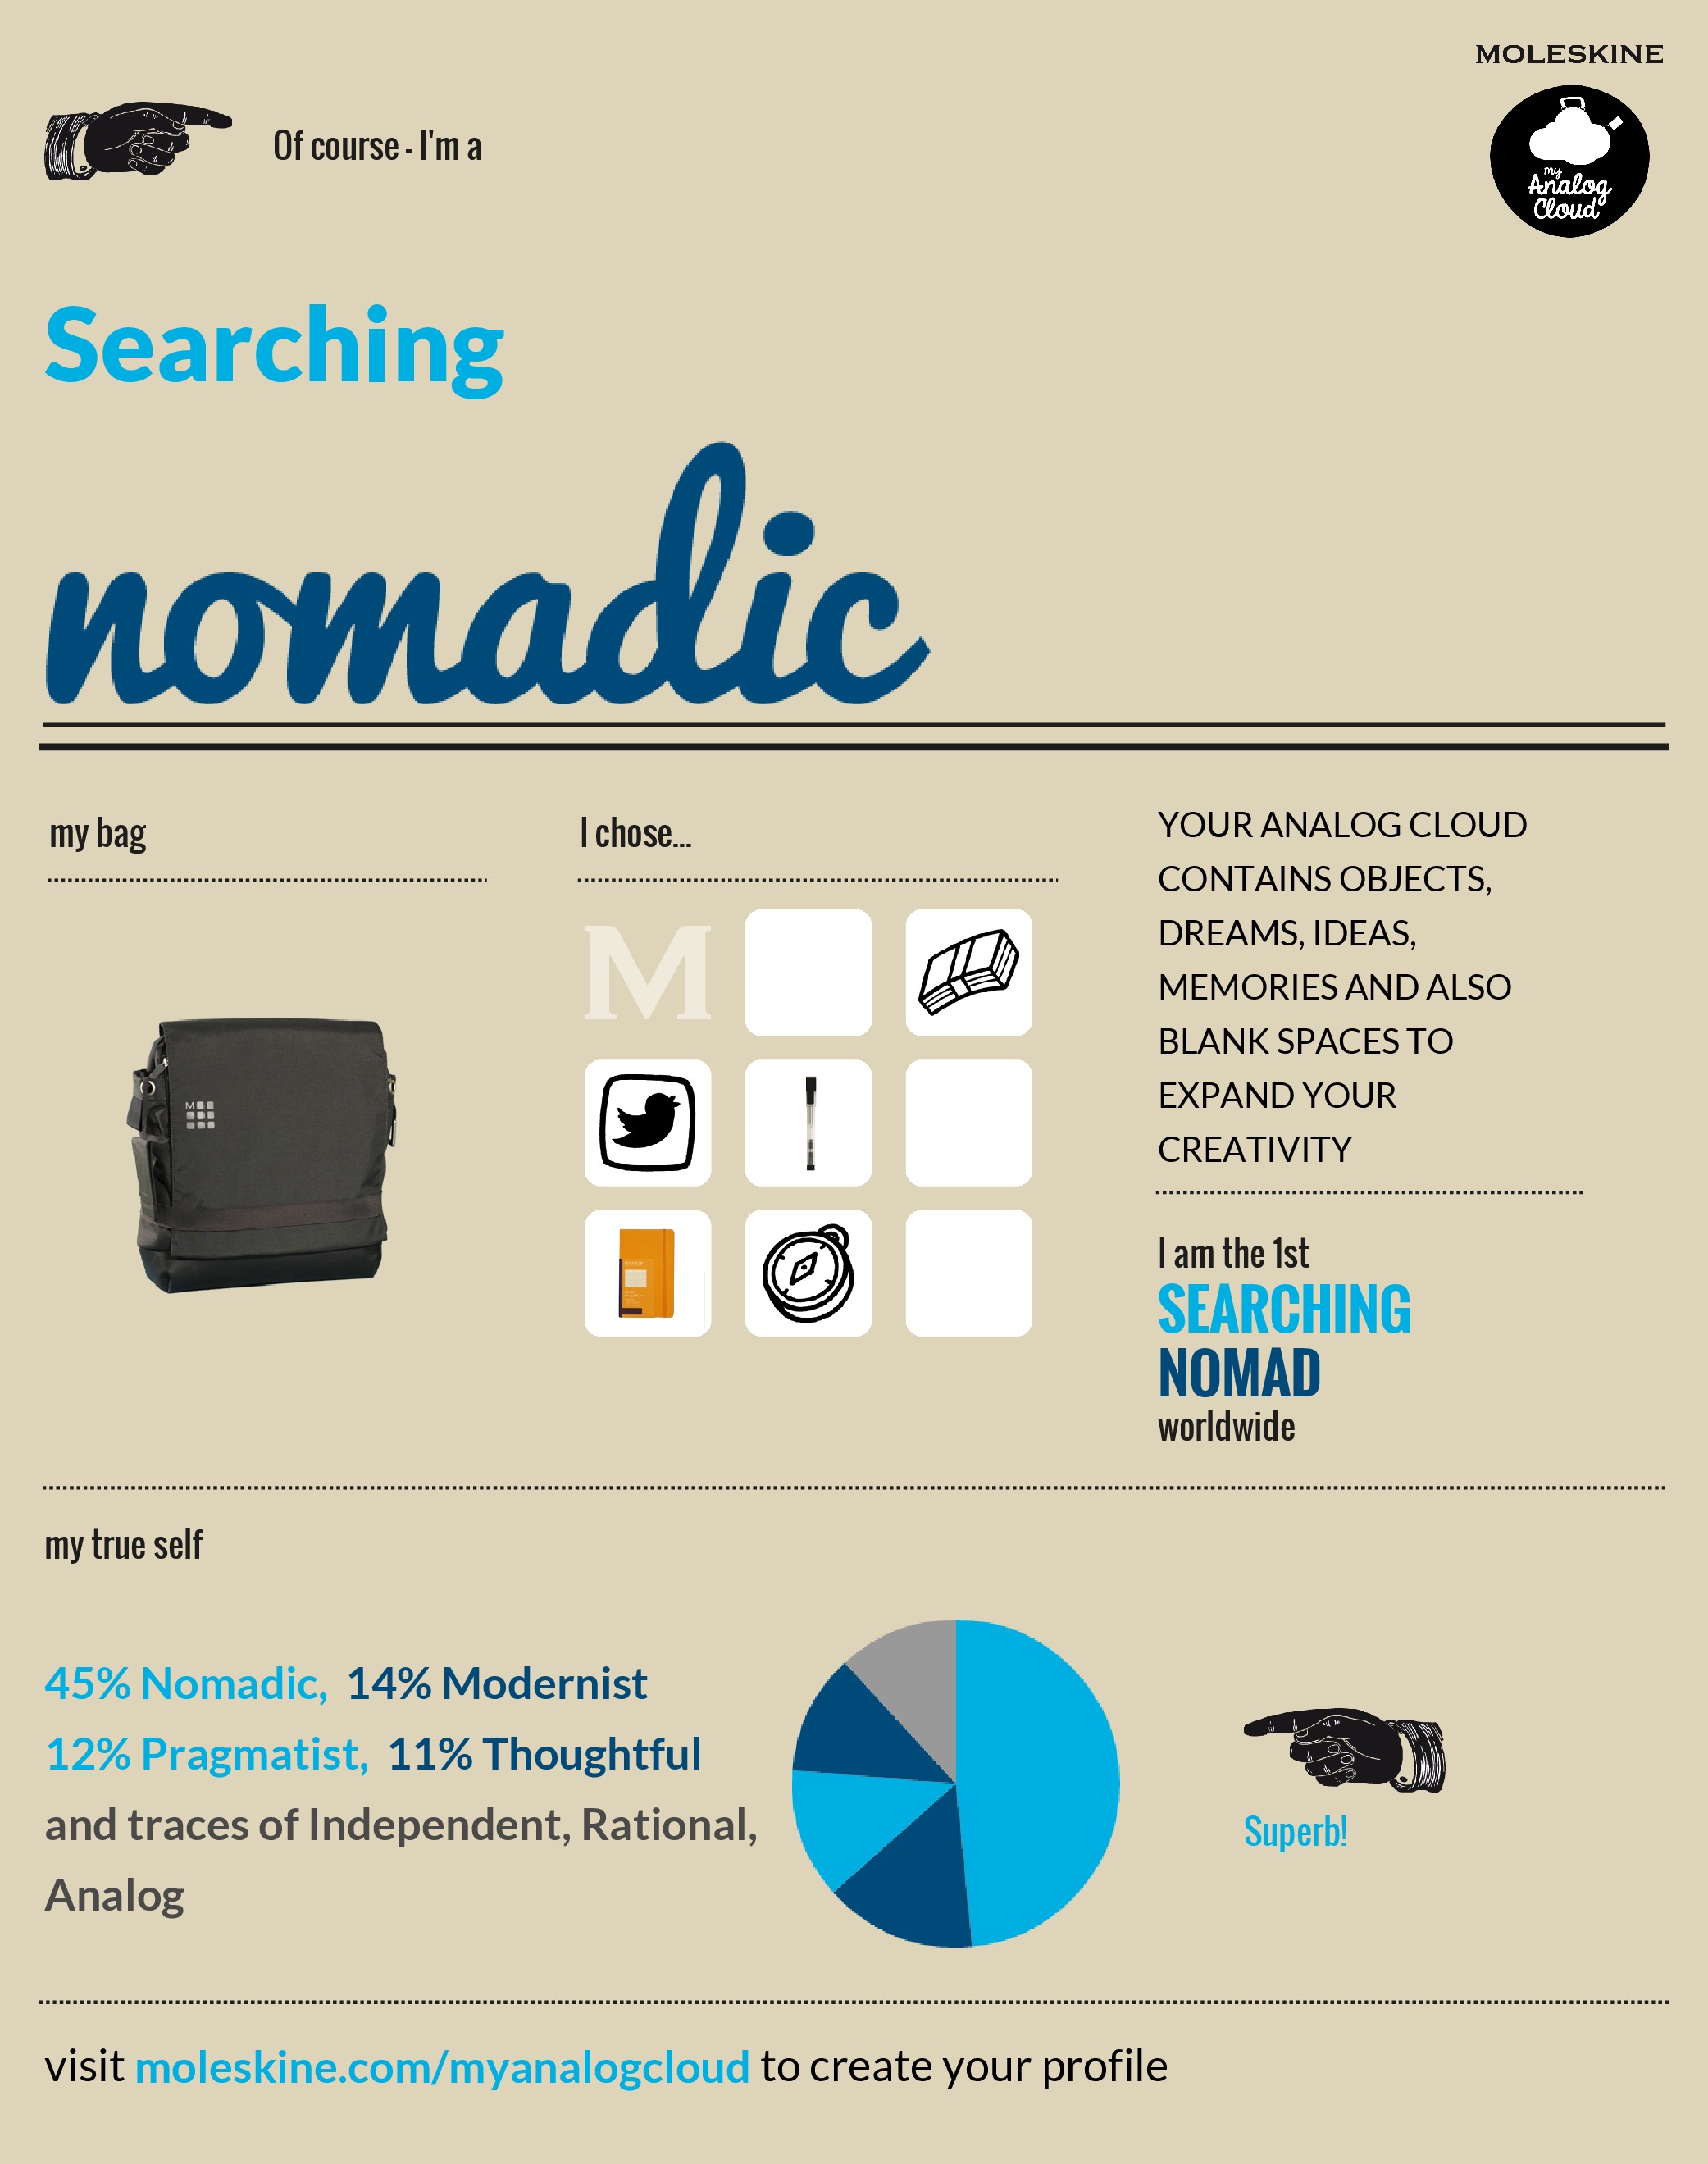 Searching Nomad